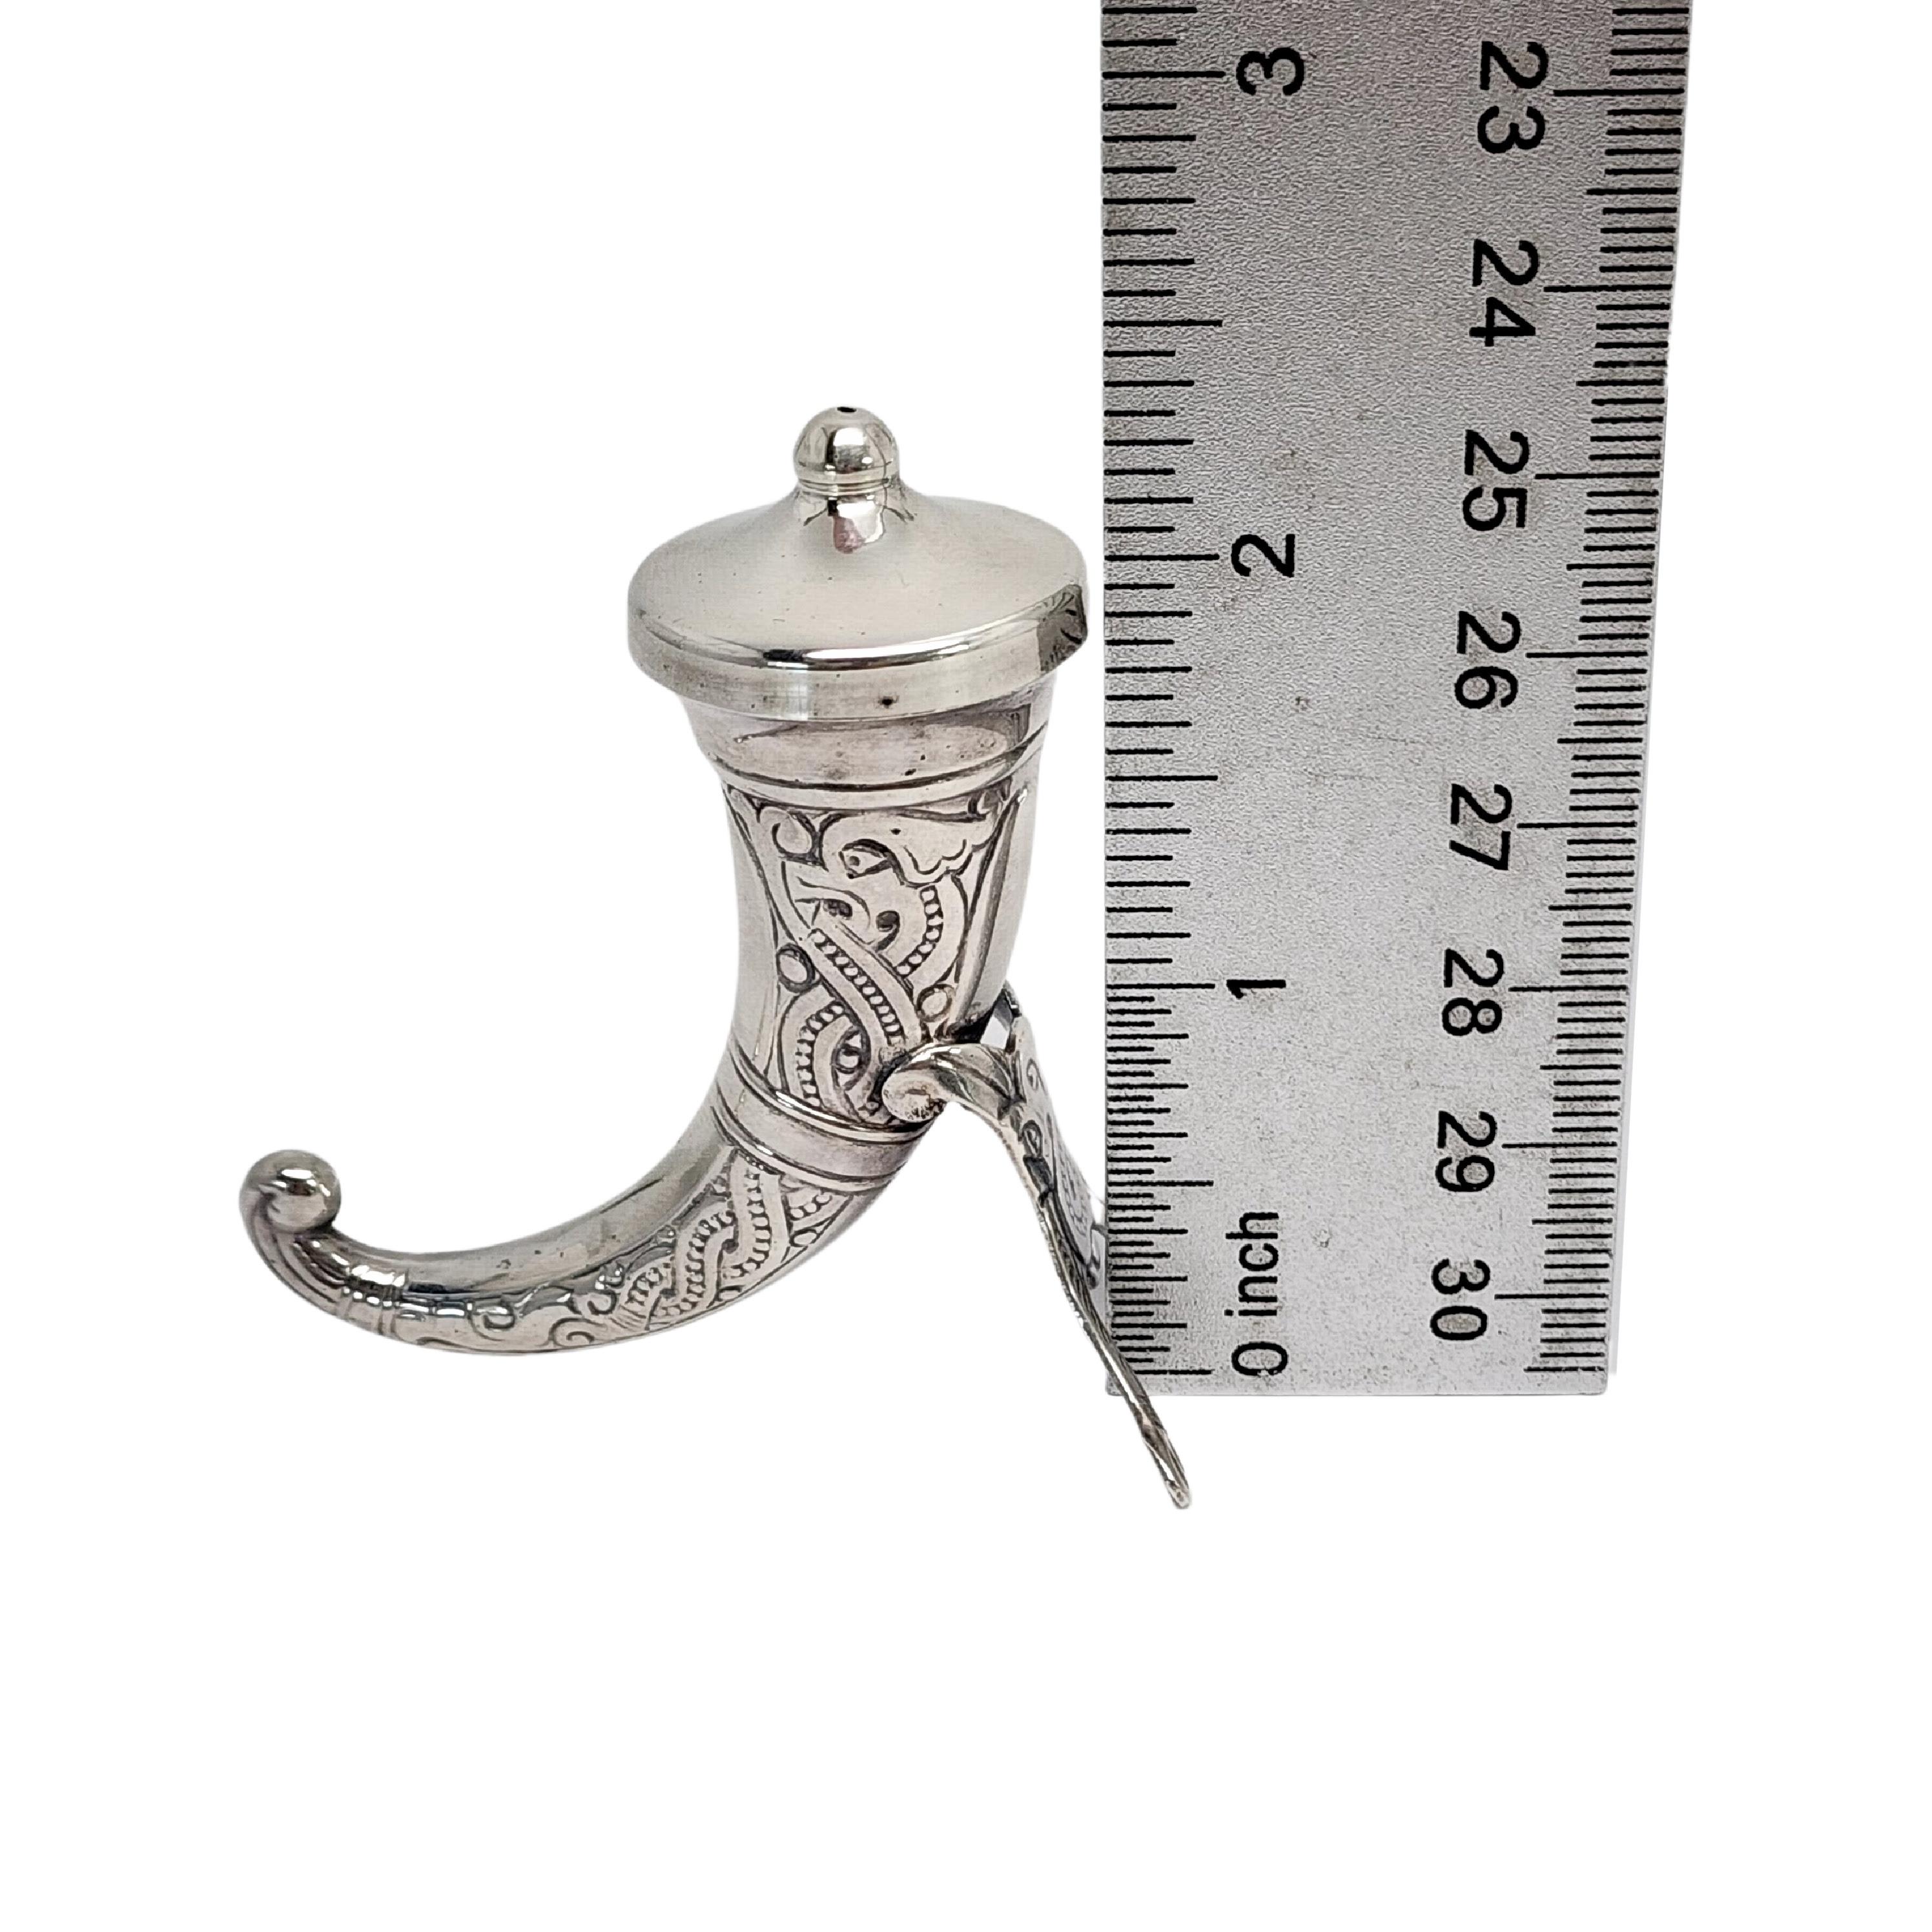 Sterling silver Viking horn pepper shaker by Theodor Olsens of Norway.

Beautifully ornate Viking horn pepper shaker featuring one small hole at the center of the removable lid.

Measures approx 2 1/2